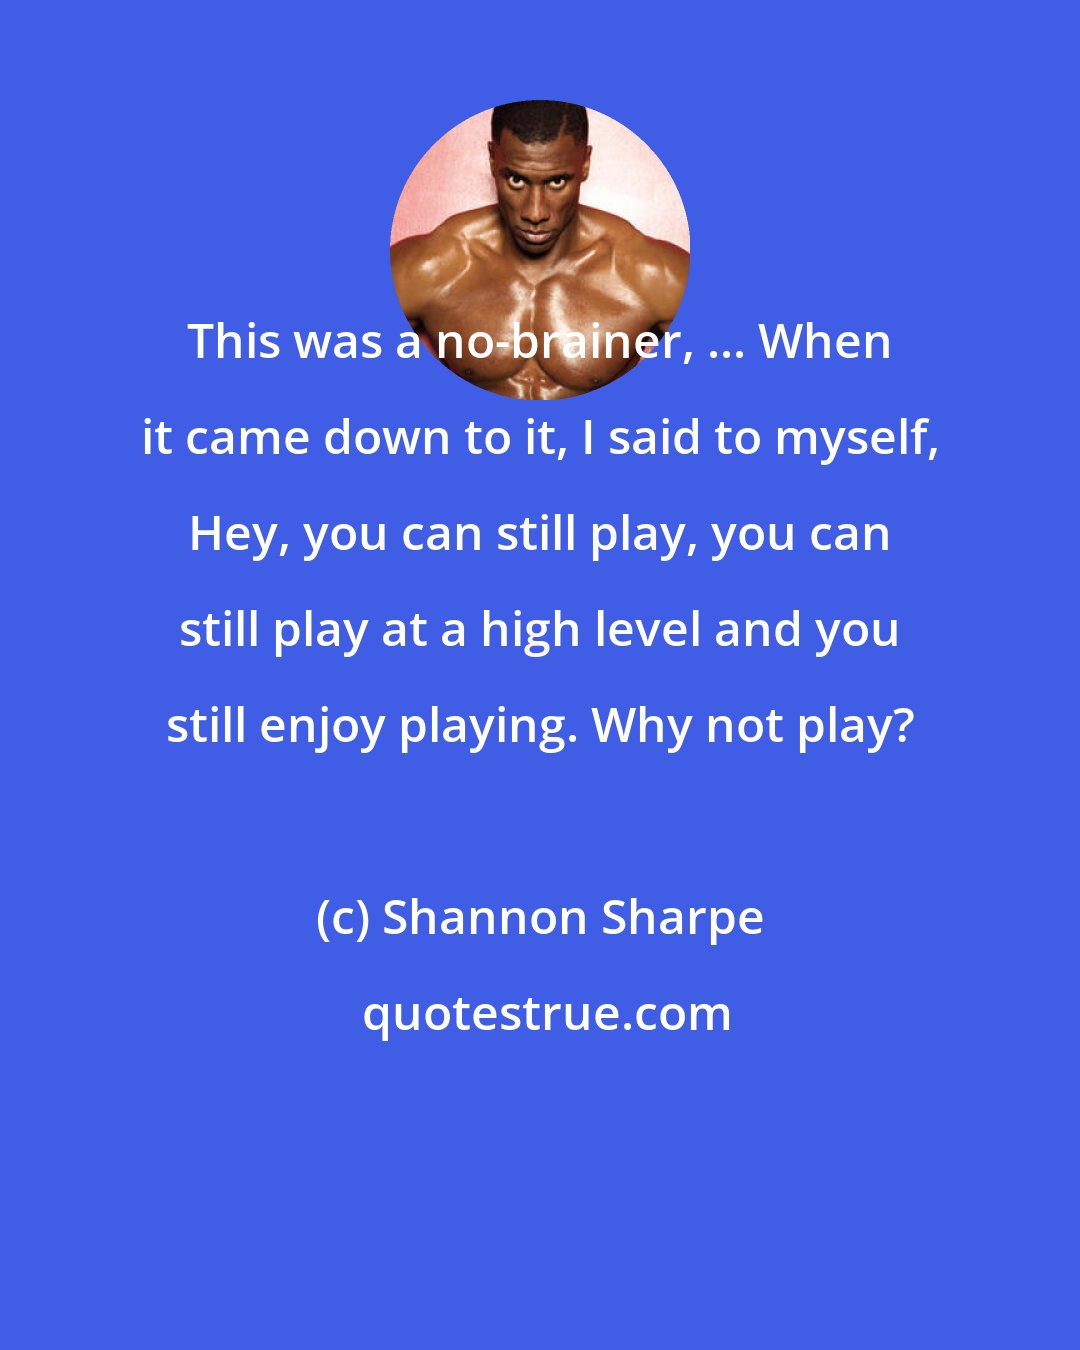 Shannon Sharpe: This was a no-brainer, ... When it came down to it, I said to myself, Hey, you can still play, you can still play at a high level and you still enjoy playing. Why not play?